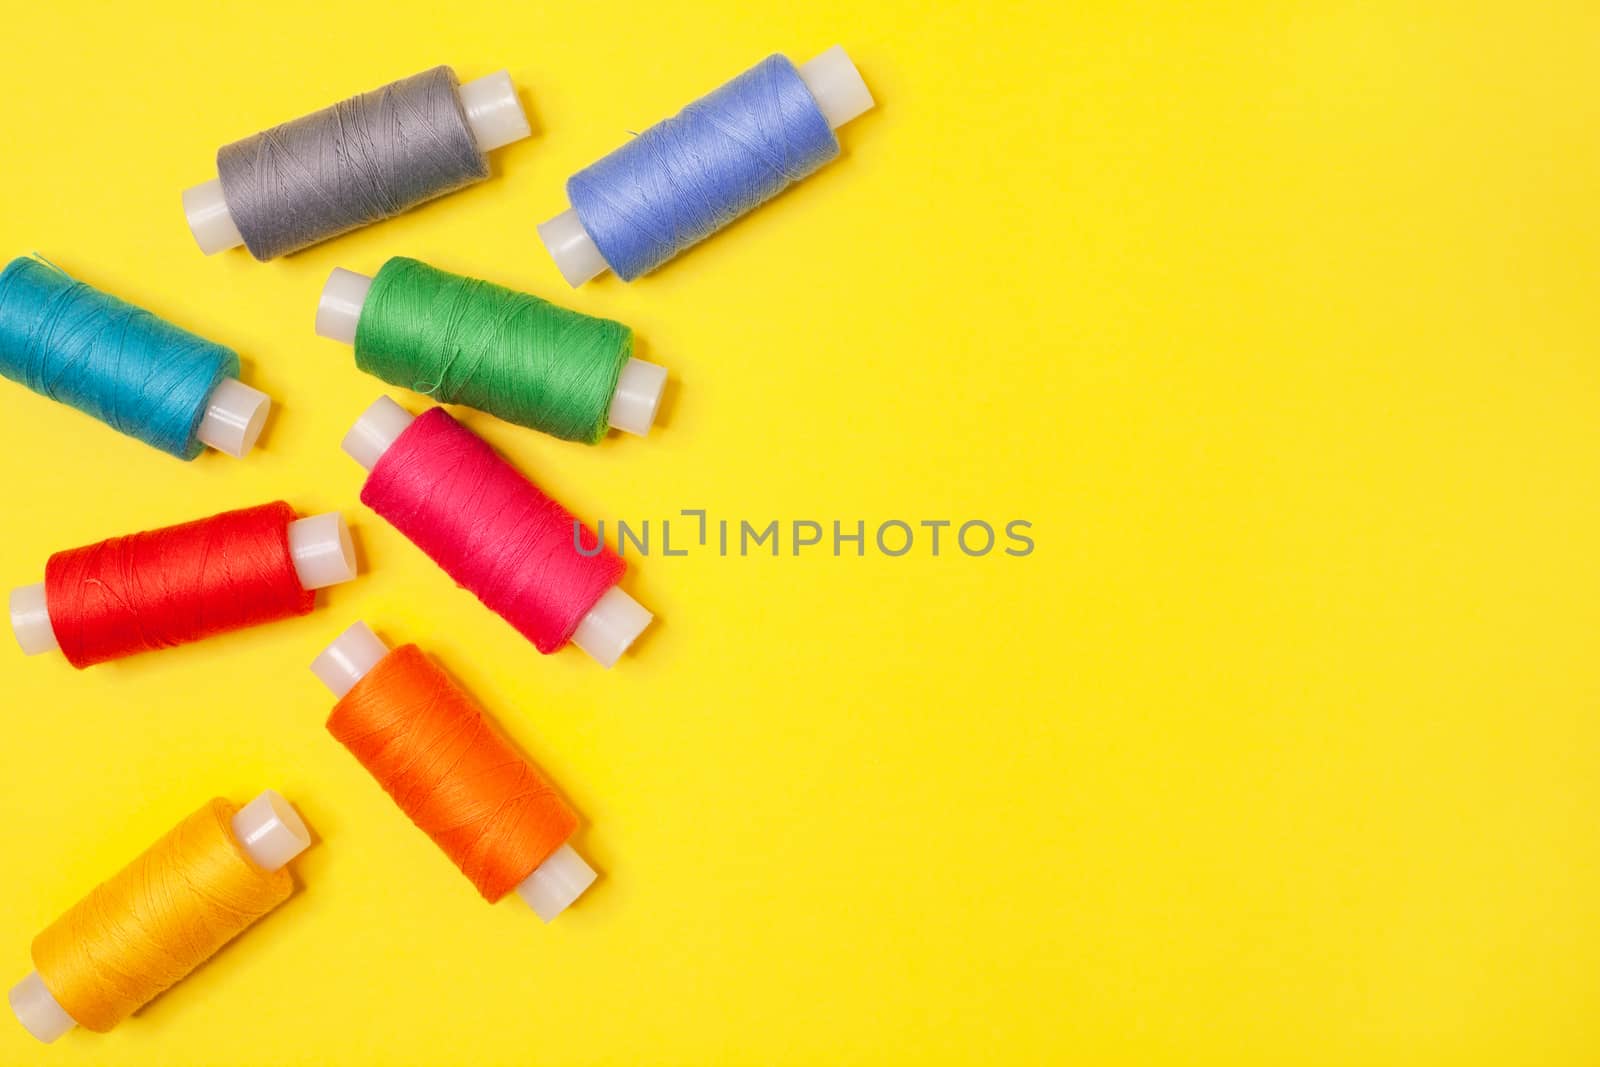 Handicraft background. Set of multicolored spools of thread on yellow background with copy space. Accessories for needlework, embroidery, sewing. Flat lay. Top view. Items scattered on left side.